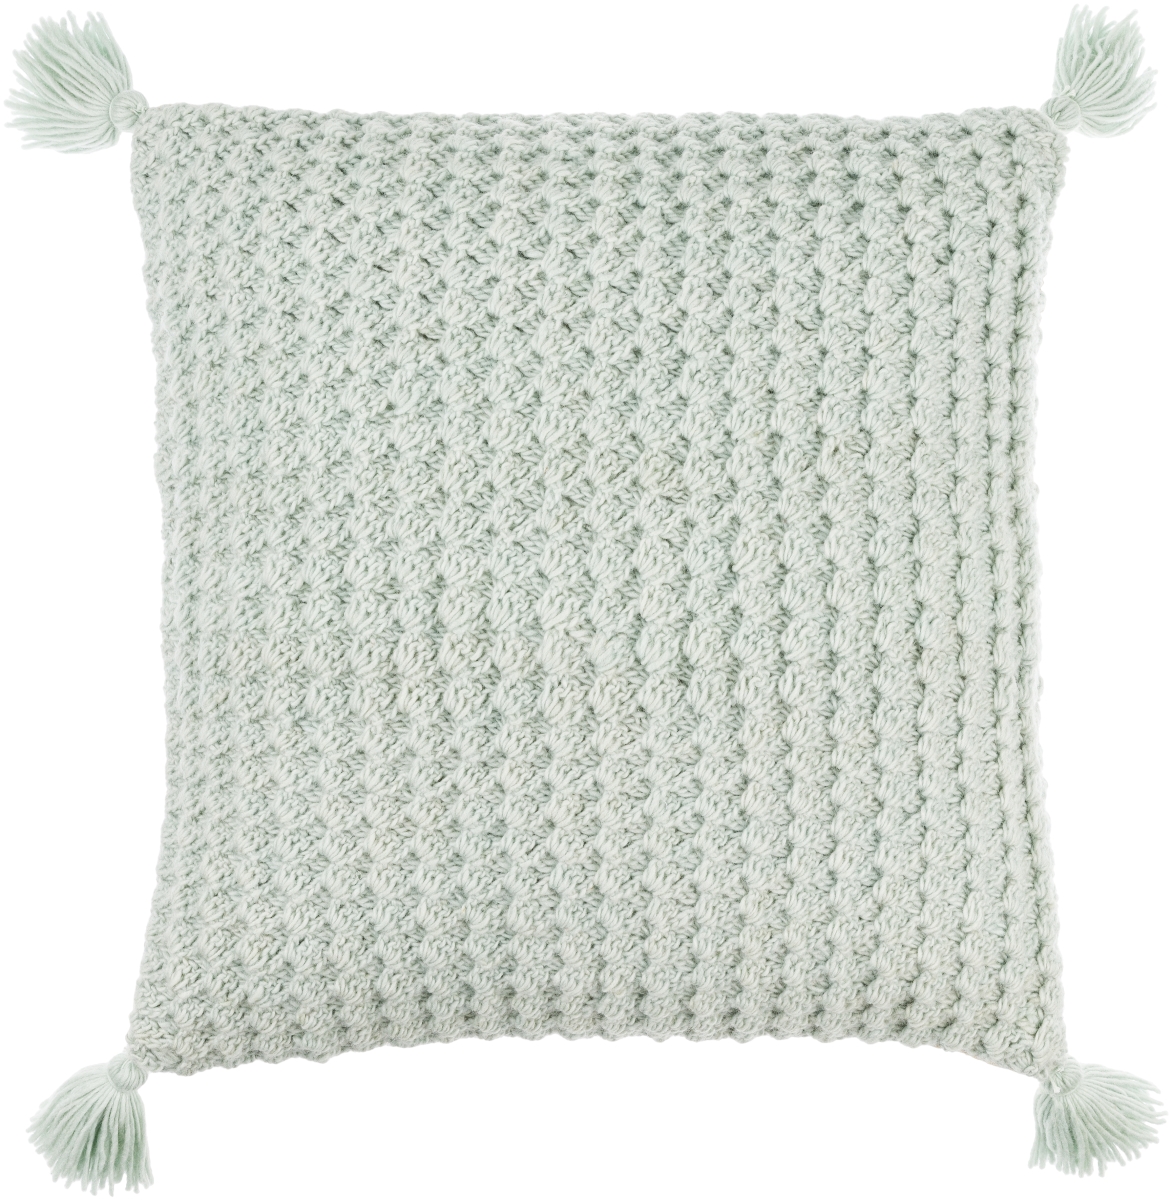 Picture of Livabliss MKO017-2222 22 x 22 in. Makrome Square Pillow Cover